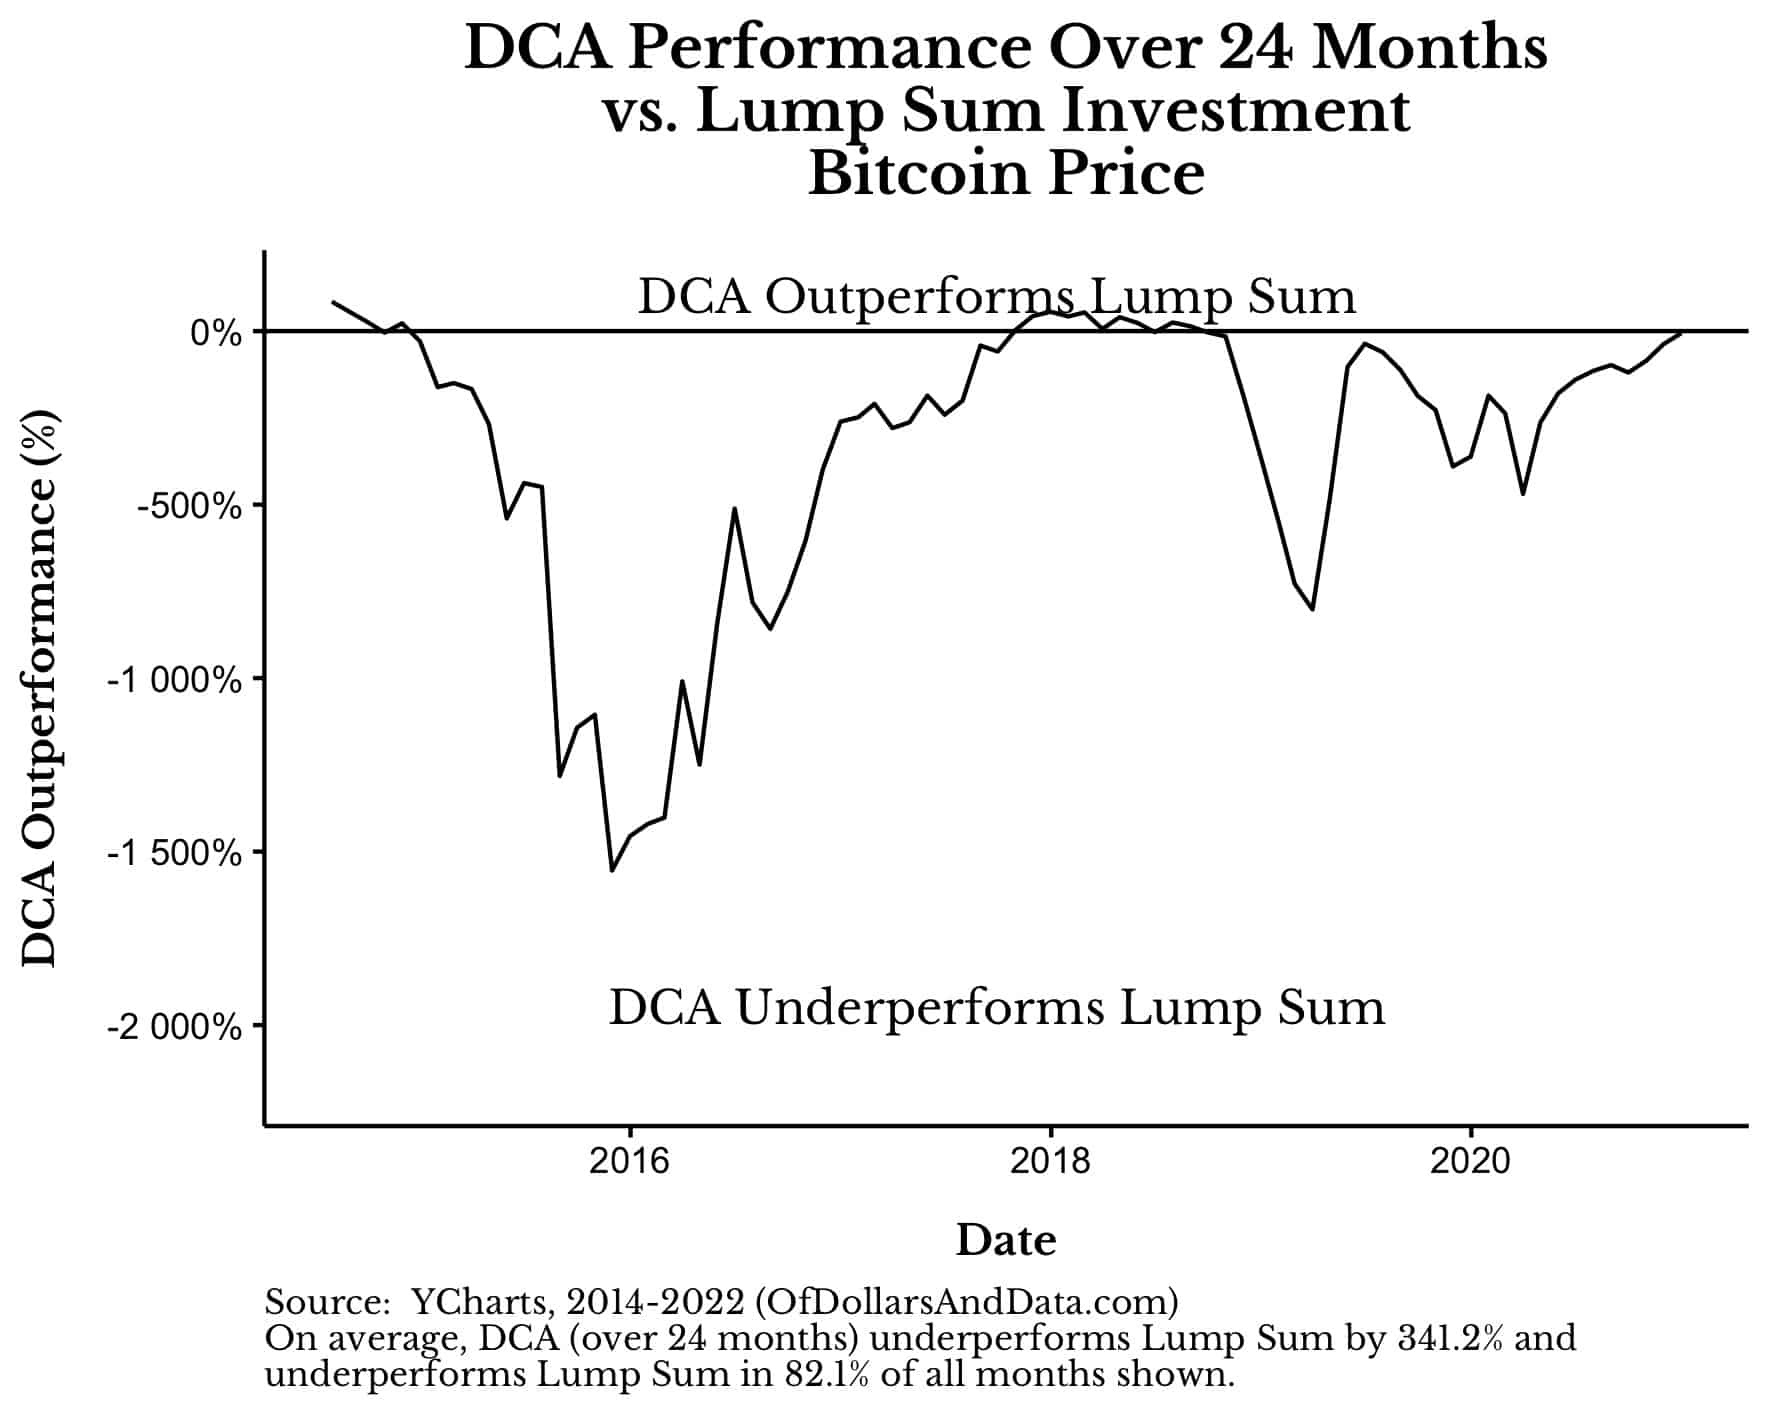 DCA vs Lump Sum performance over 24 months into Bitcoin from 2014-2022